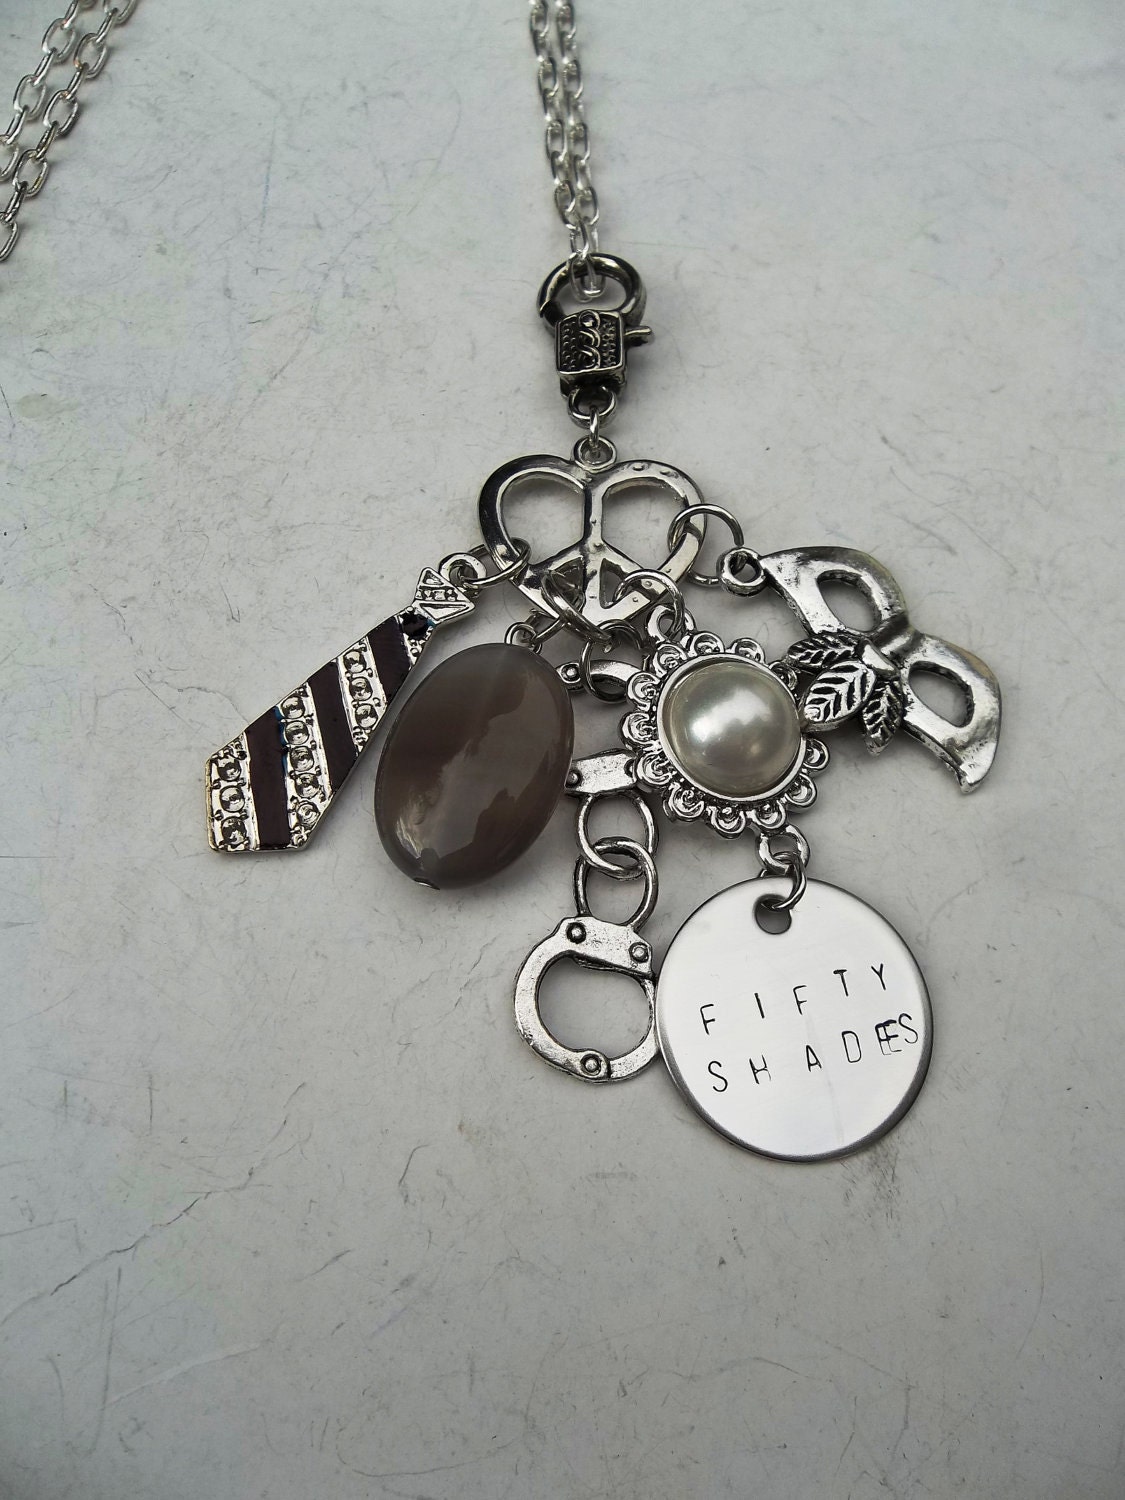 My Fifty Shades of Grey Long Cluster Necklace Hand Stamped Inspired by the Book